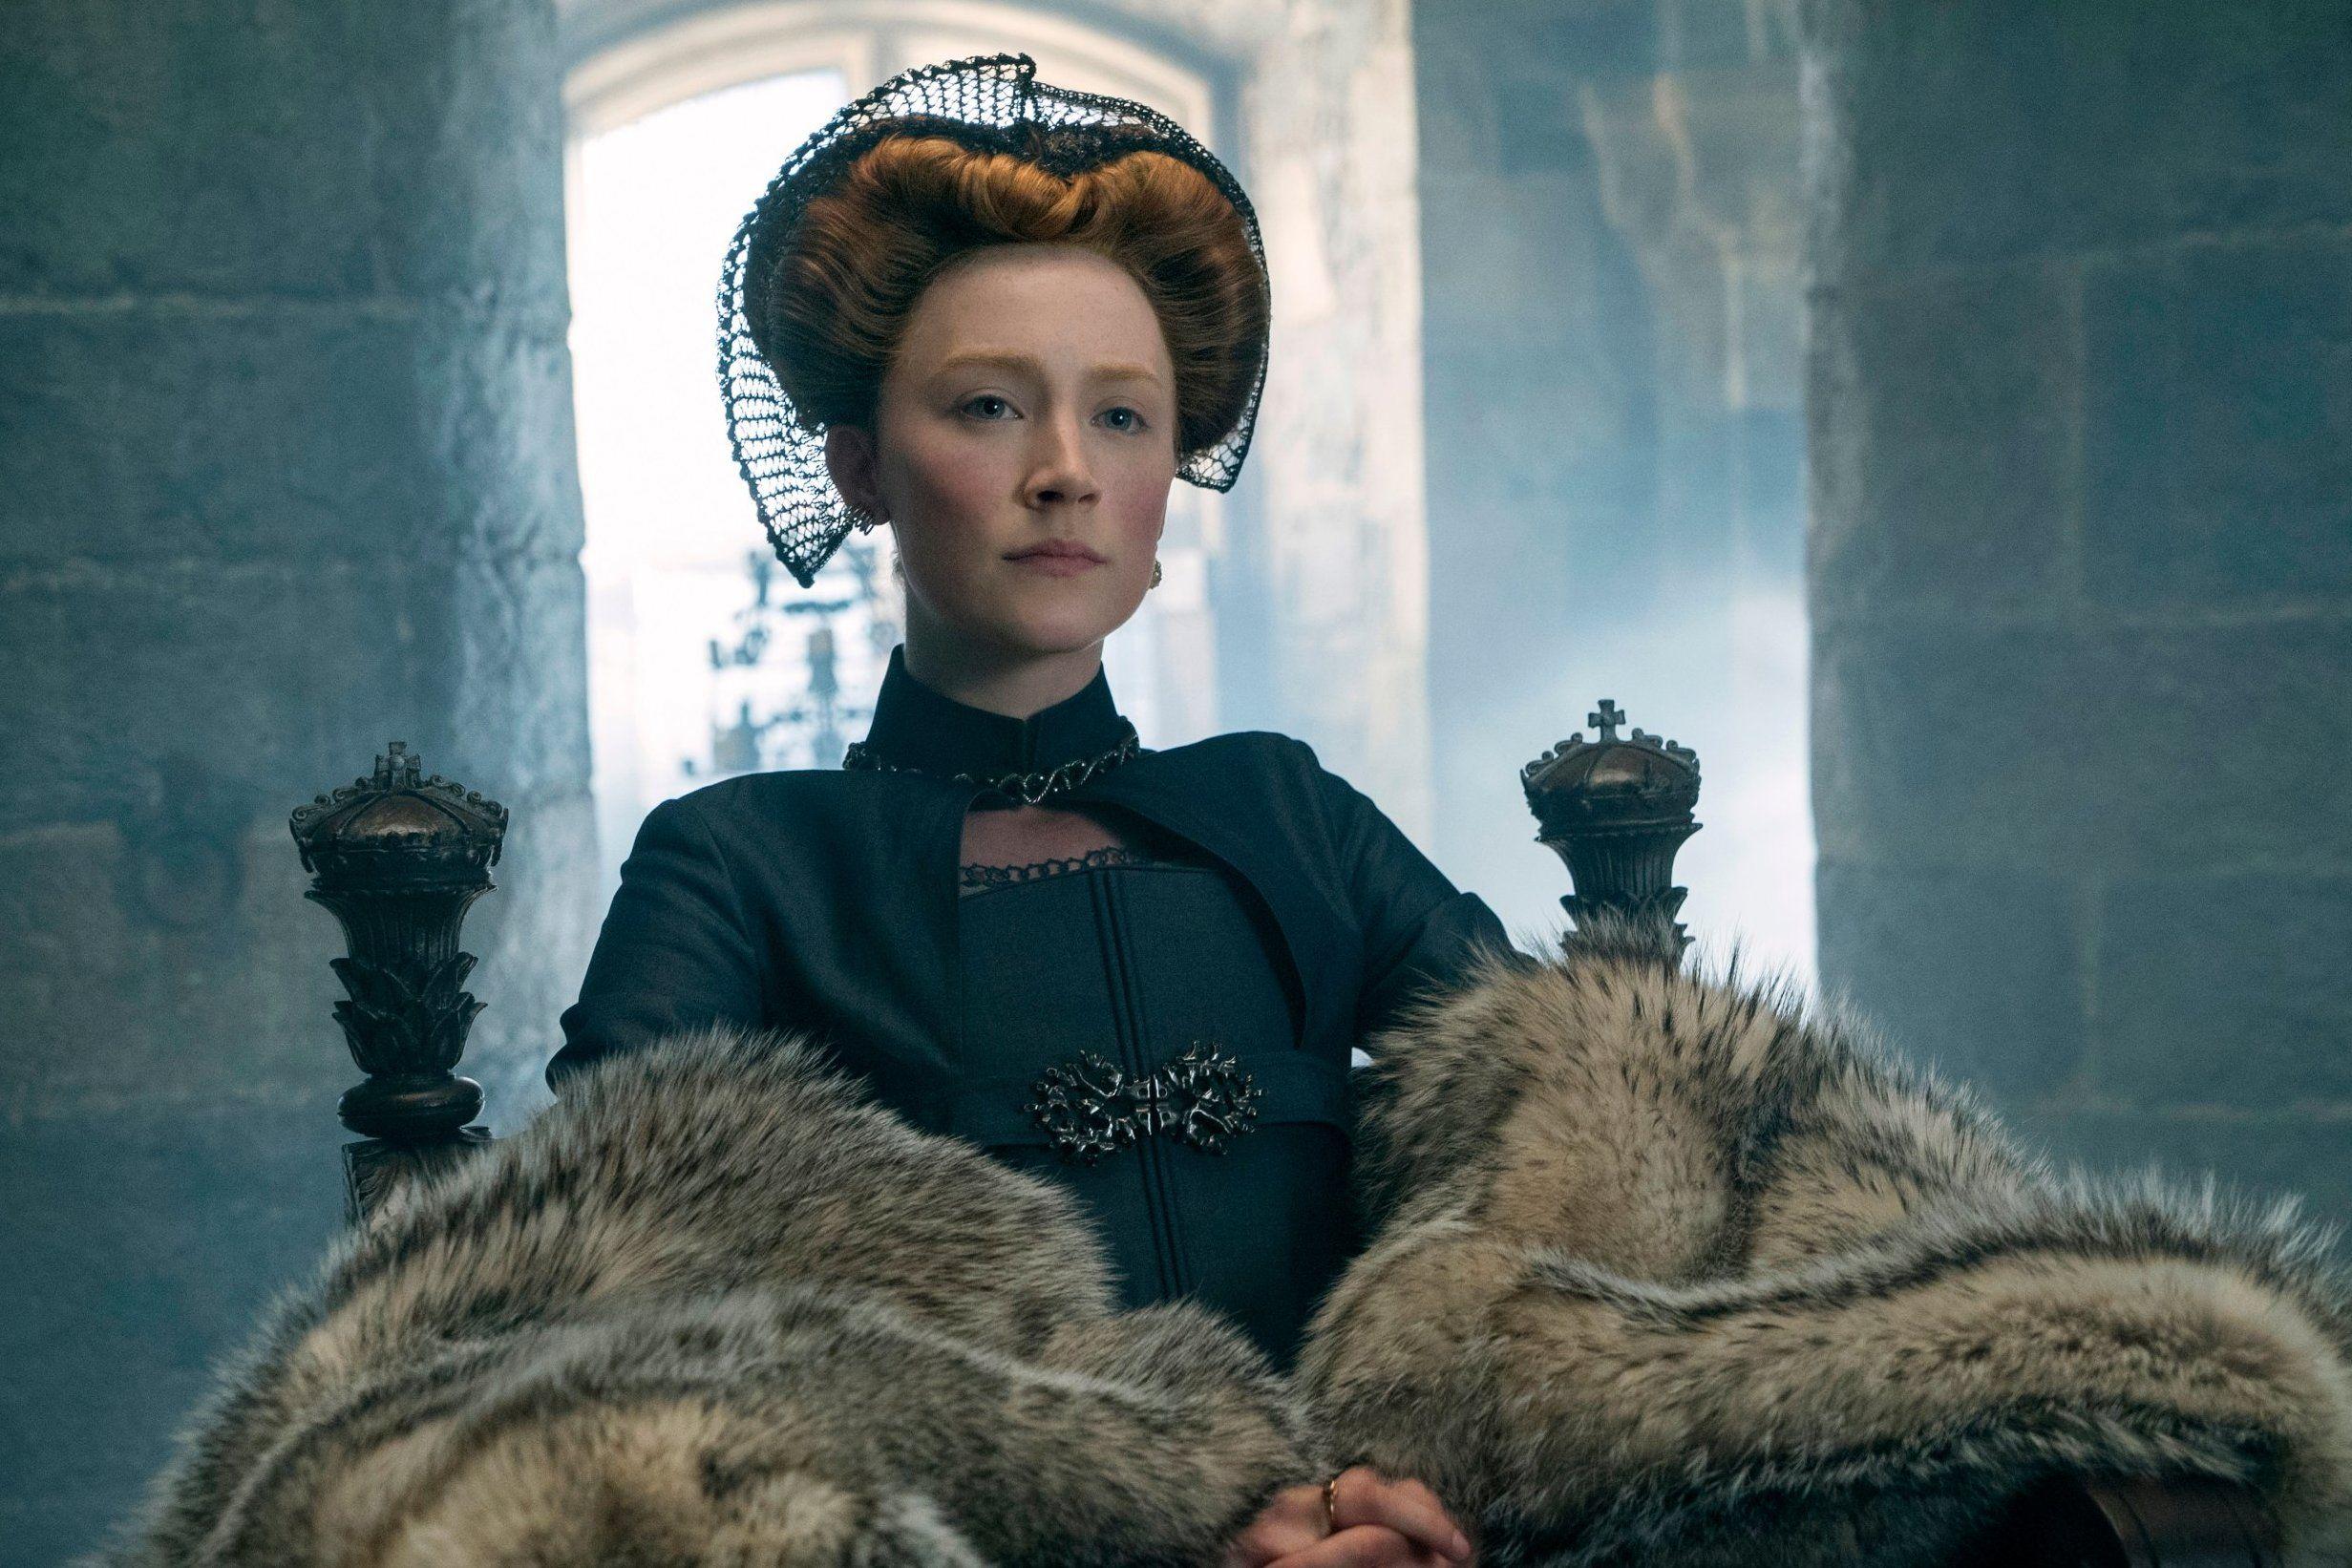 Mary Queen of Scots: How historically accurate is it?